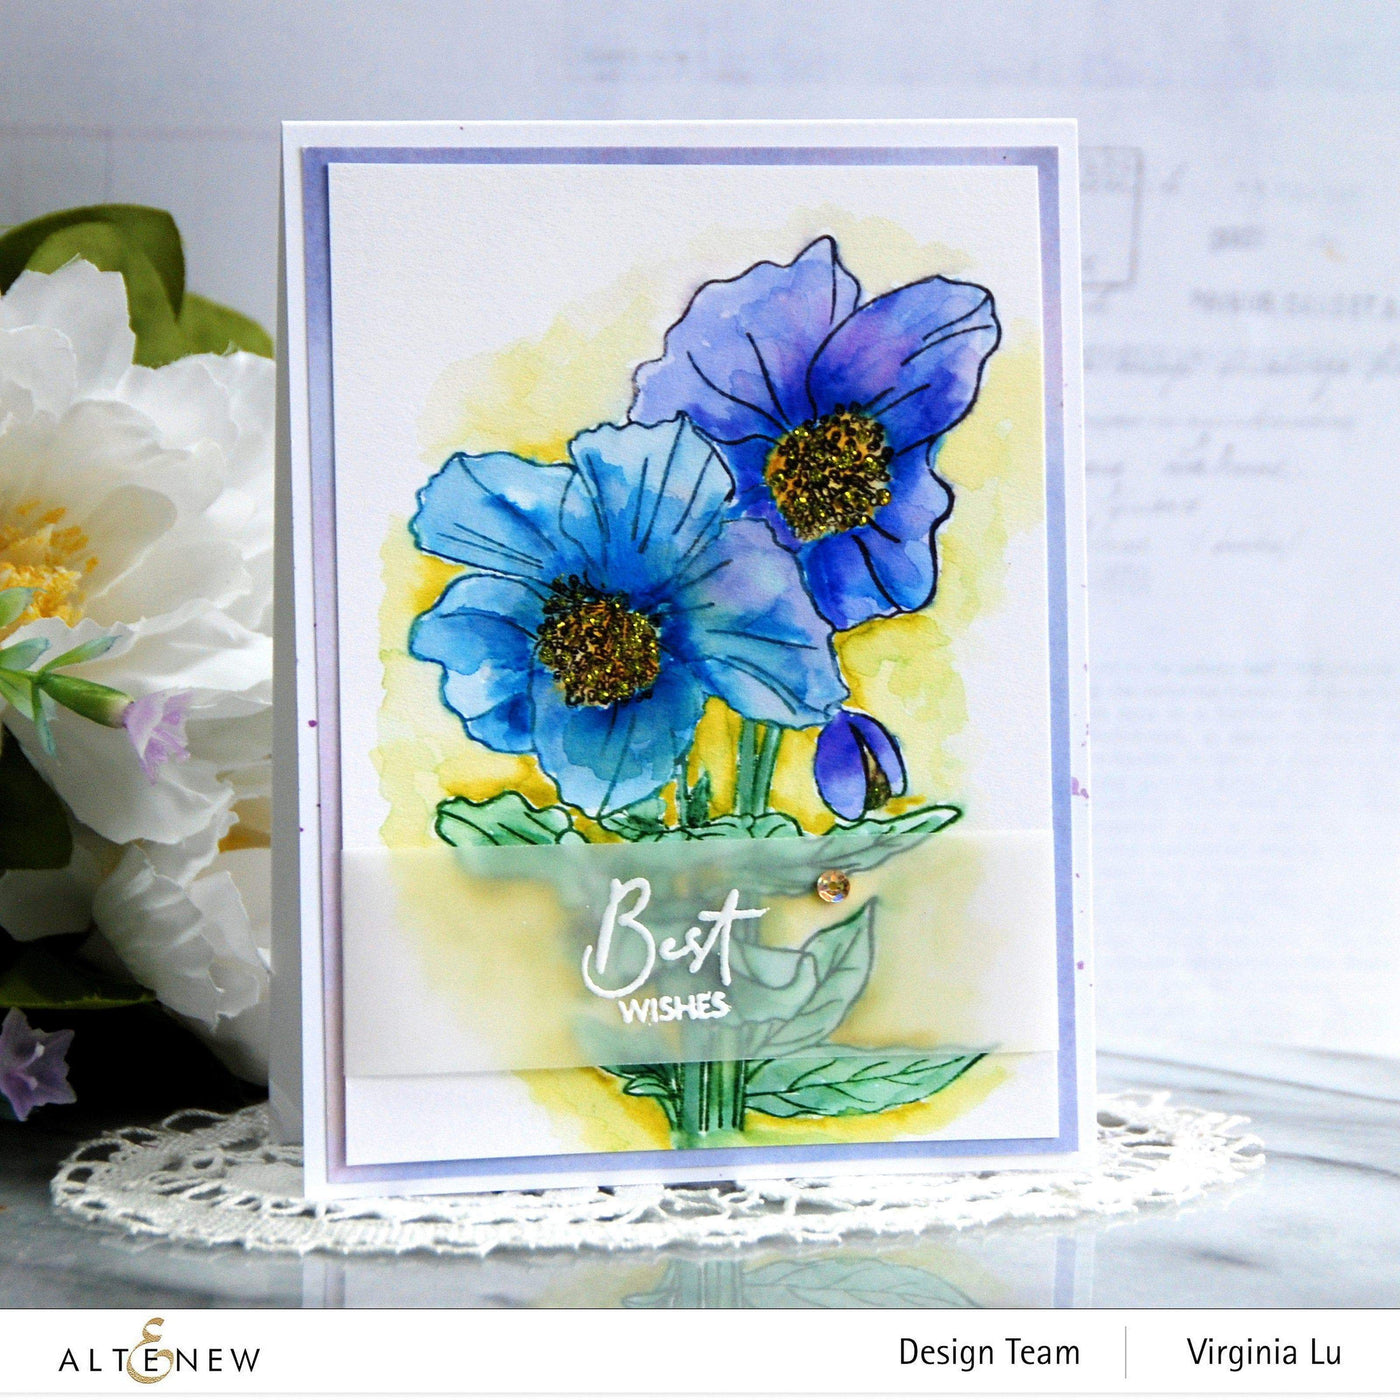 Photocentric Clear Stamps Paint-A-Flower: Himalayan Poppy Outline Stamp Set